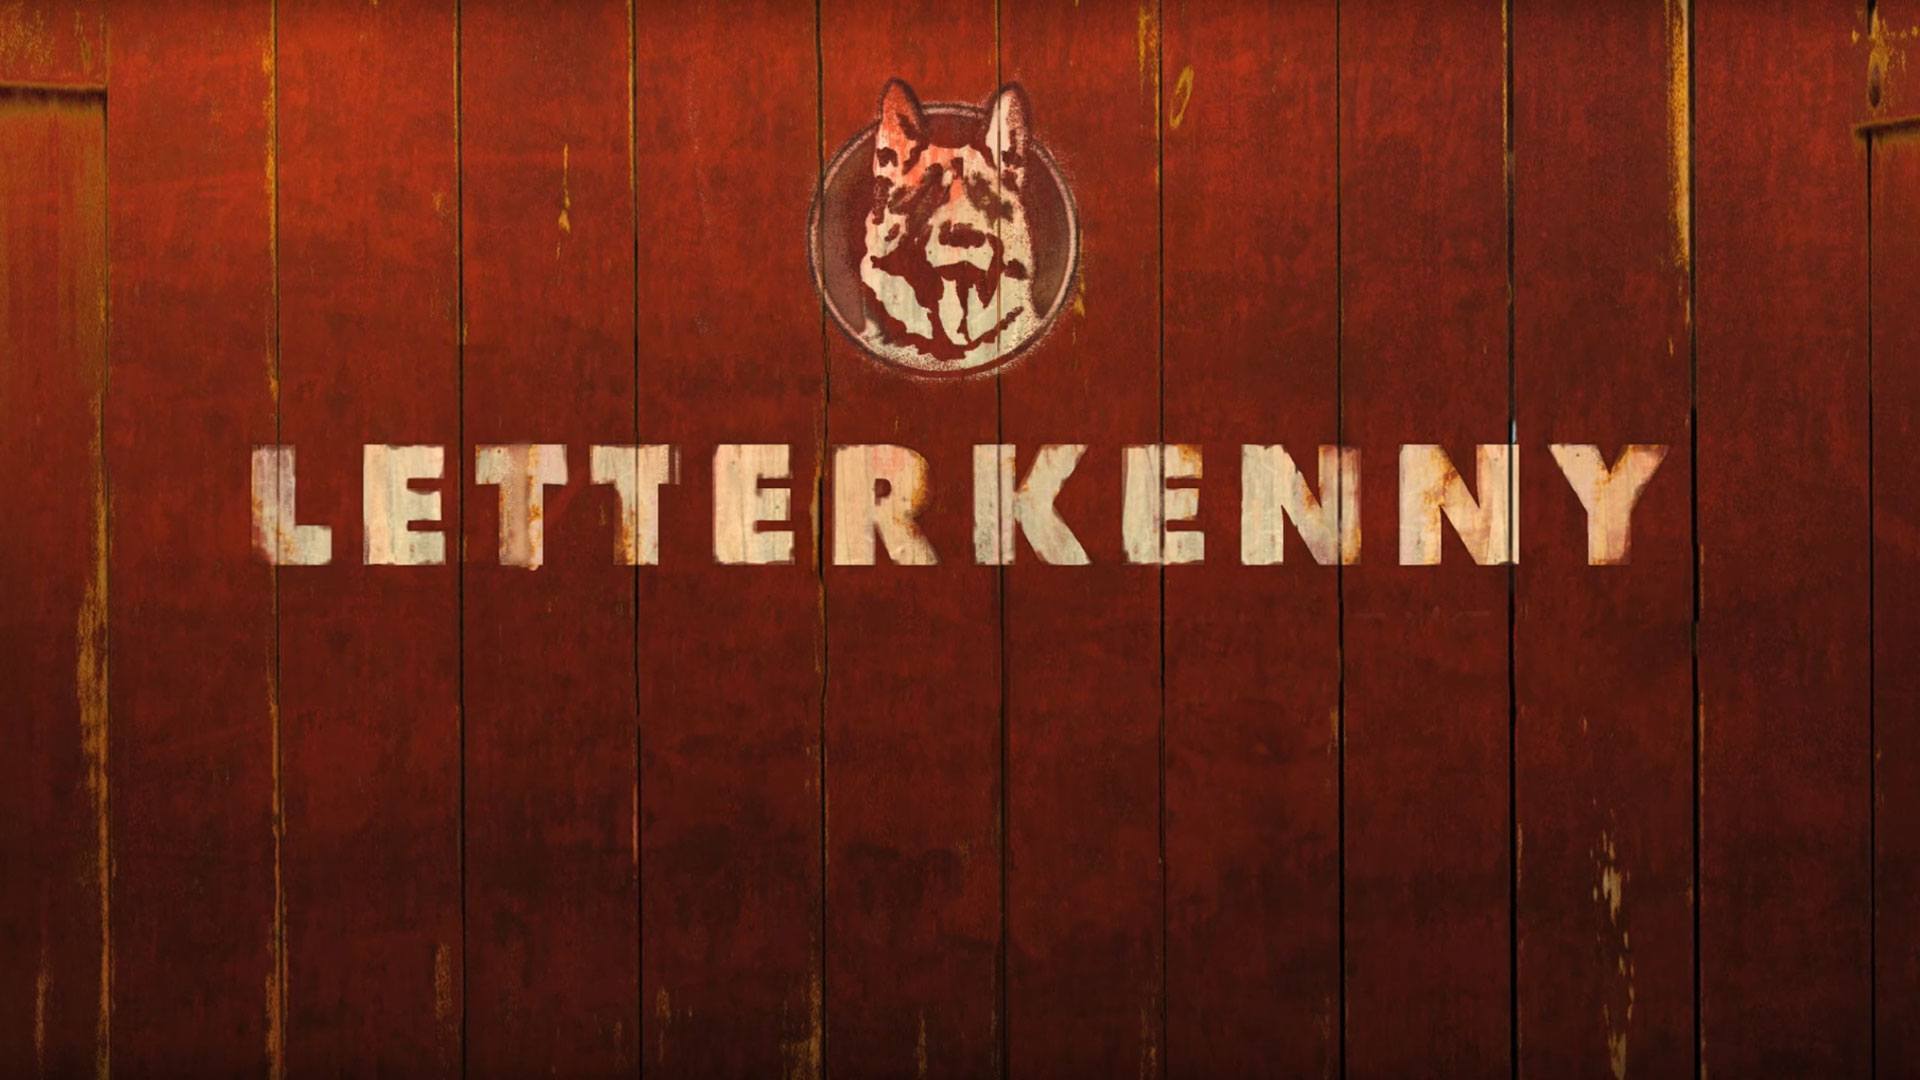 Letterkenny Wallpapers Hd Download the best hd and ultra hd wallpapers for ...